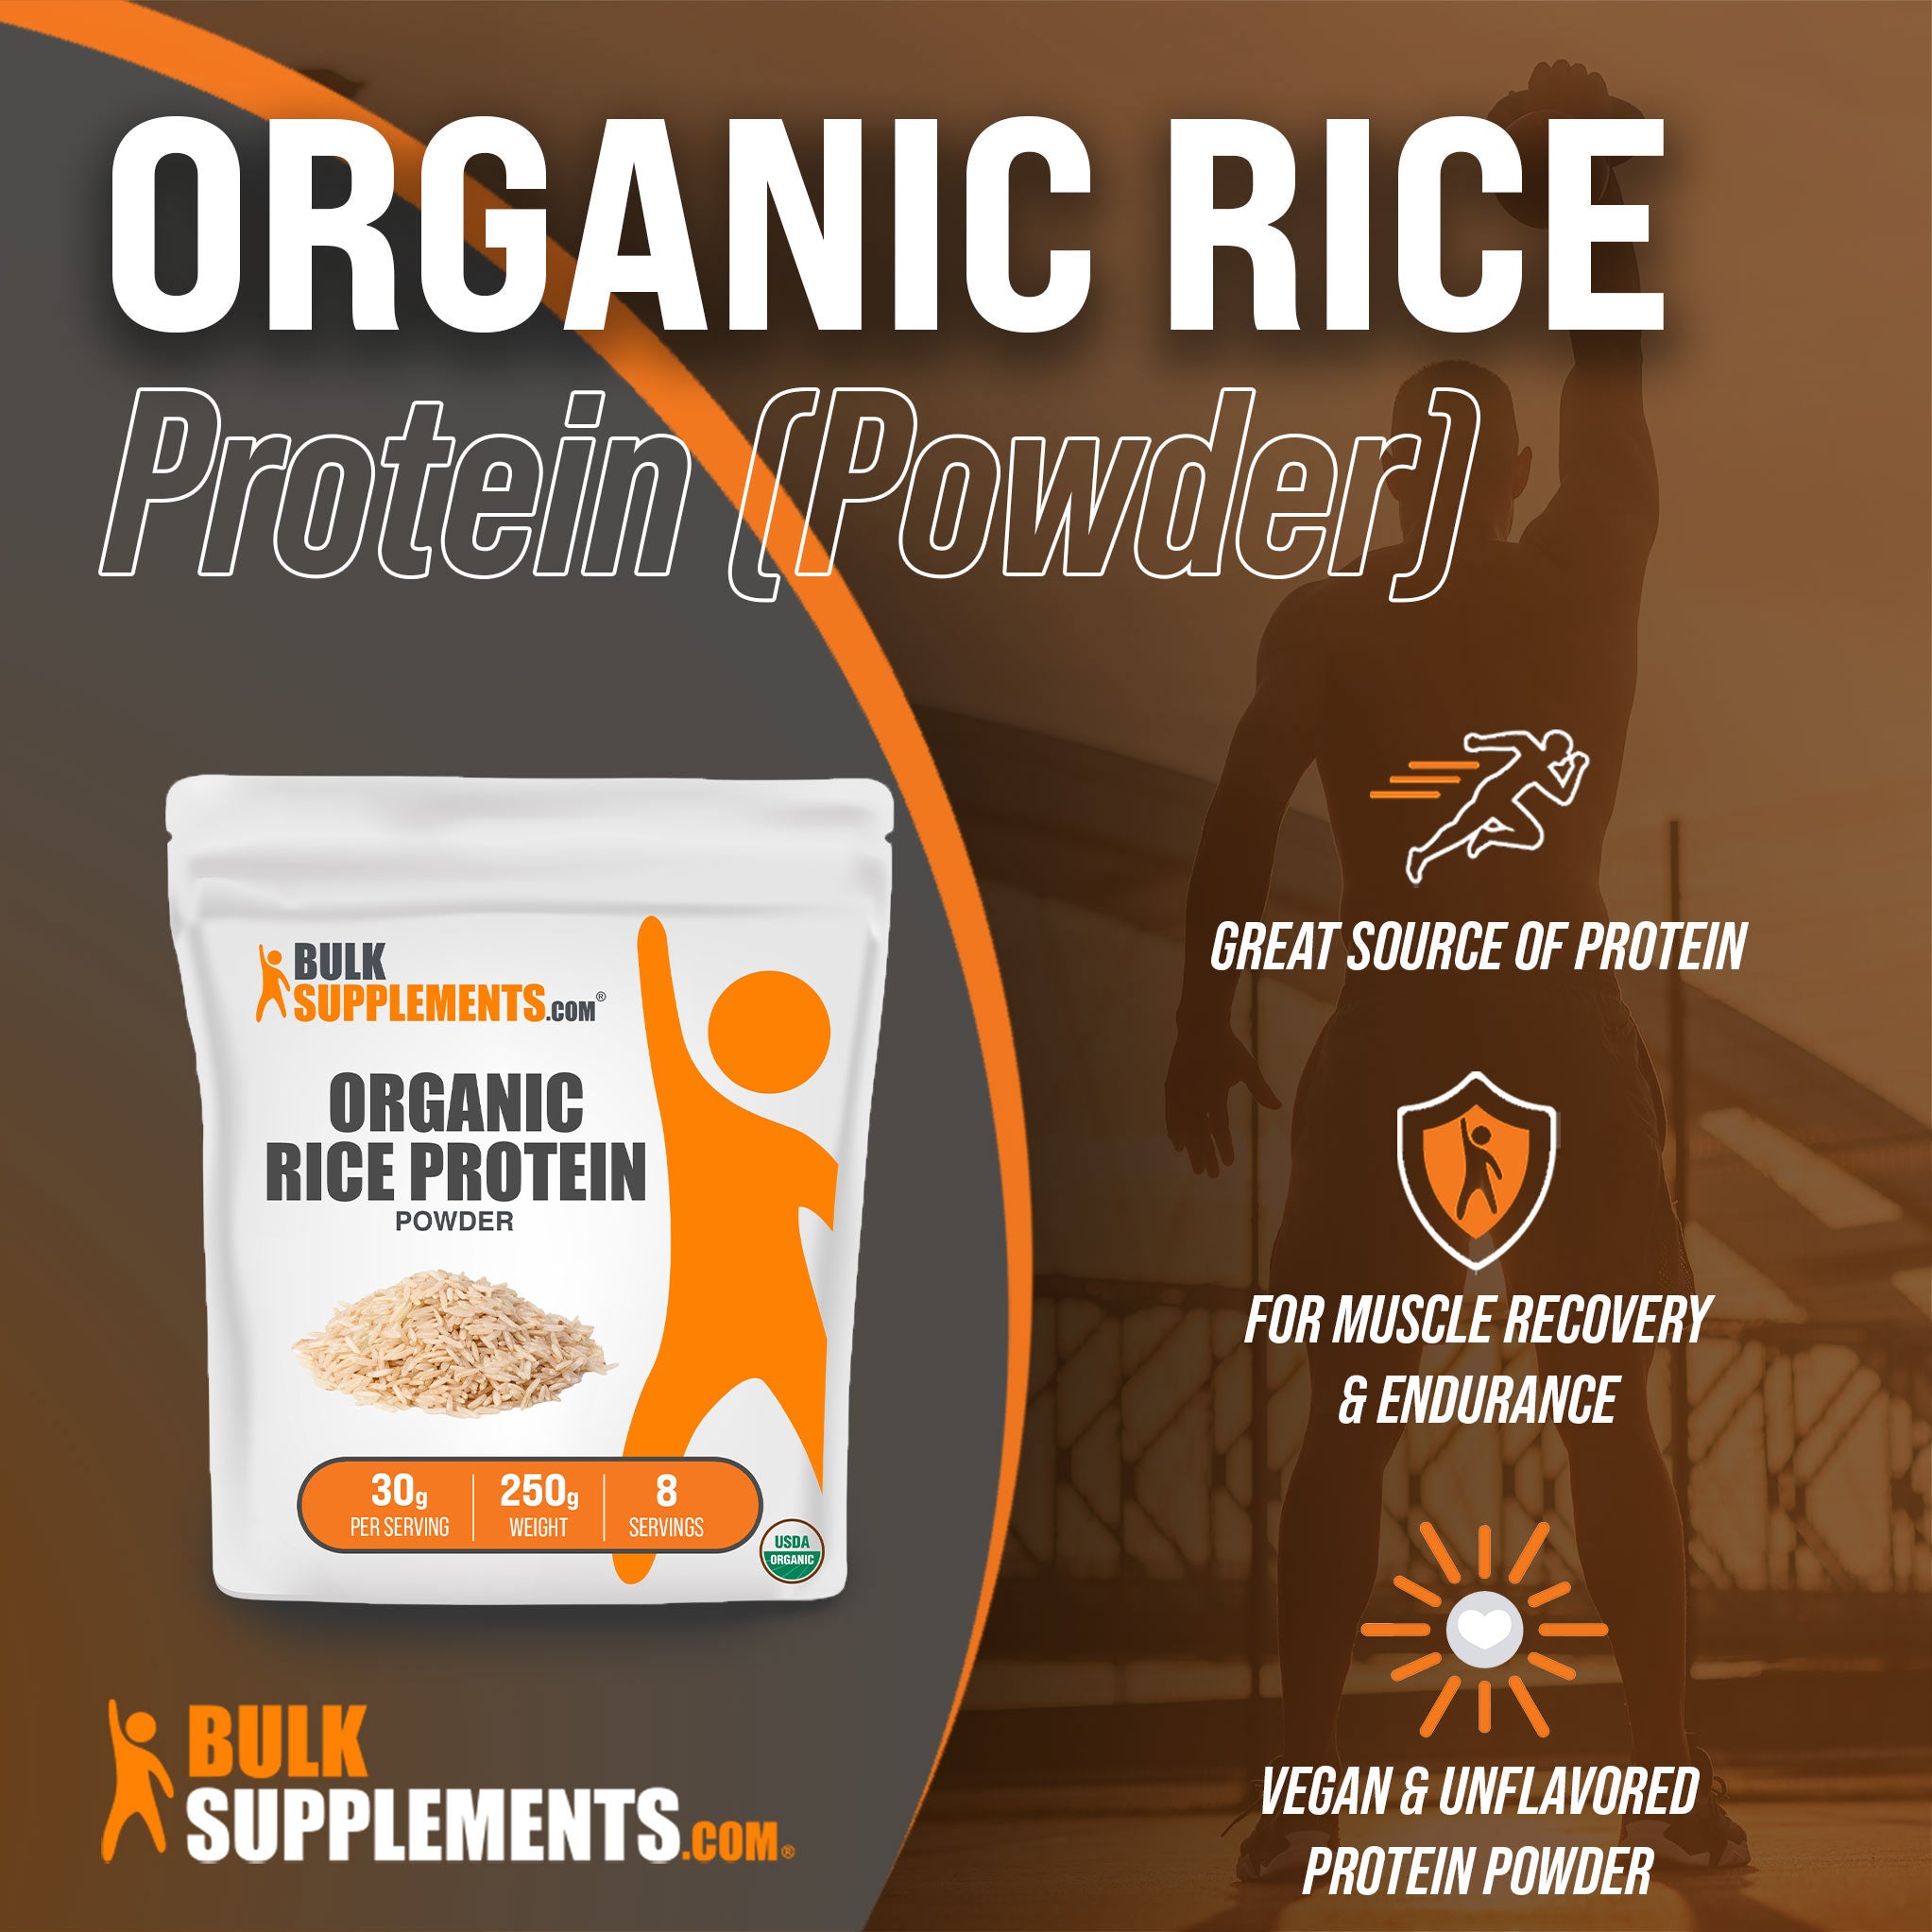 Benefits of Organic Rice Protein Powder: great source of protein, for muscle recovery and endurance, vegan and unflavored protein powder